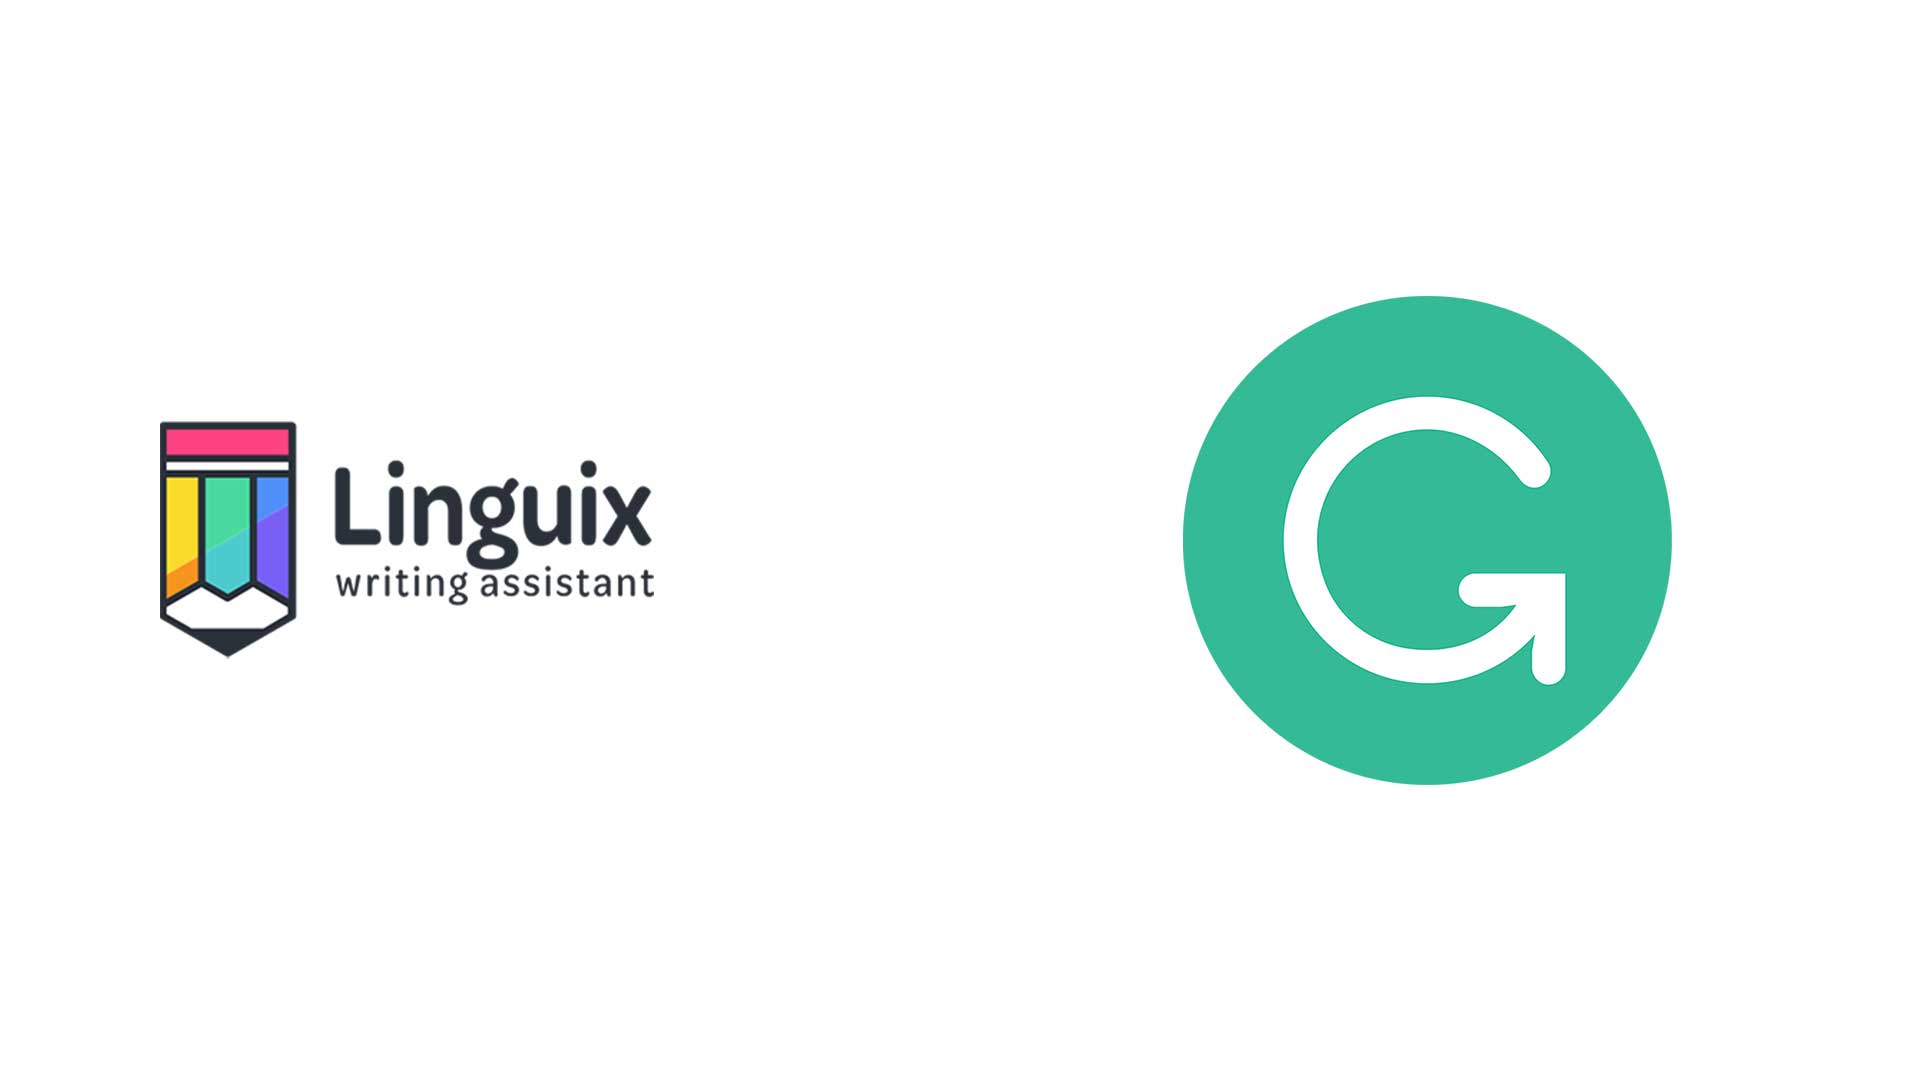 Linguix vs. Grammarly: Which One Is Better for Online Writers?